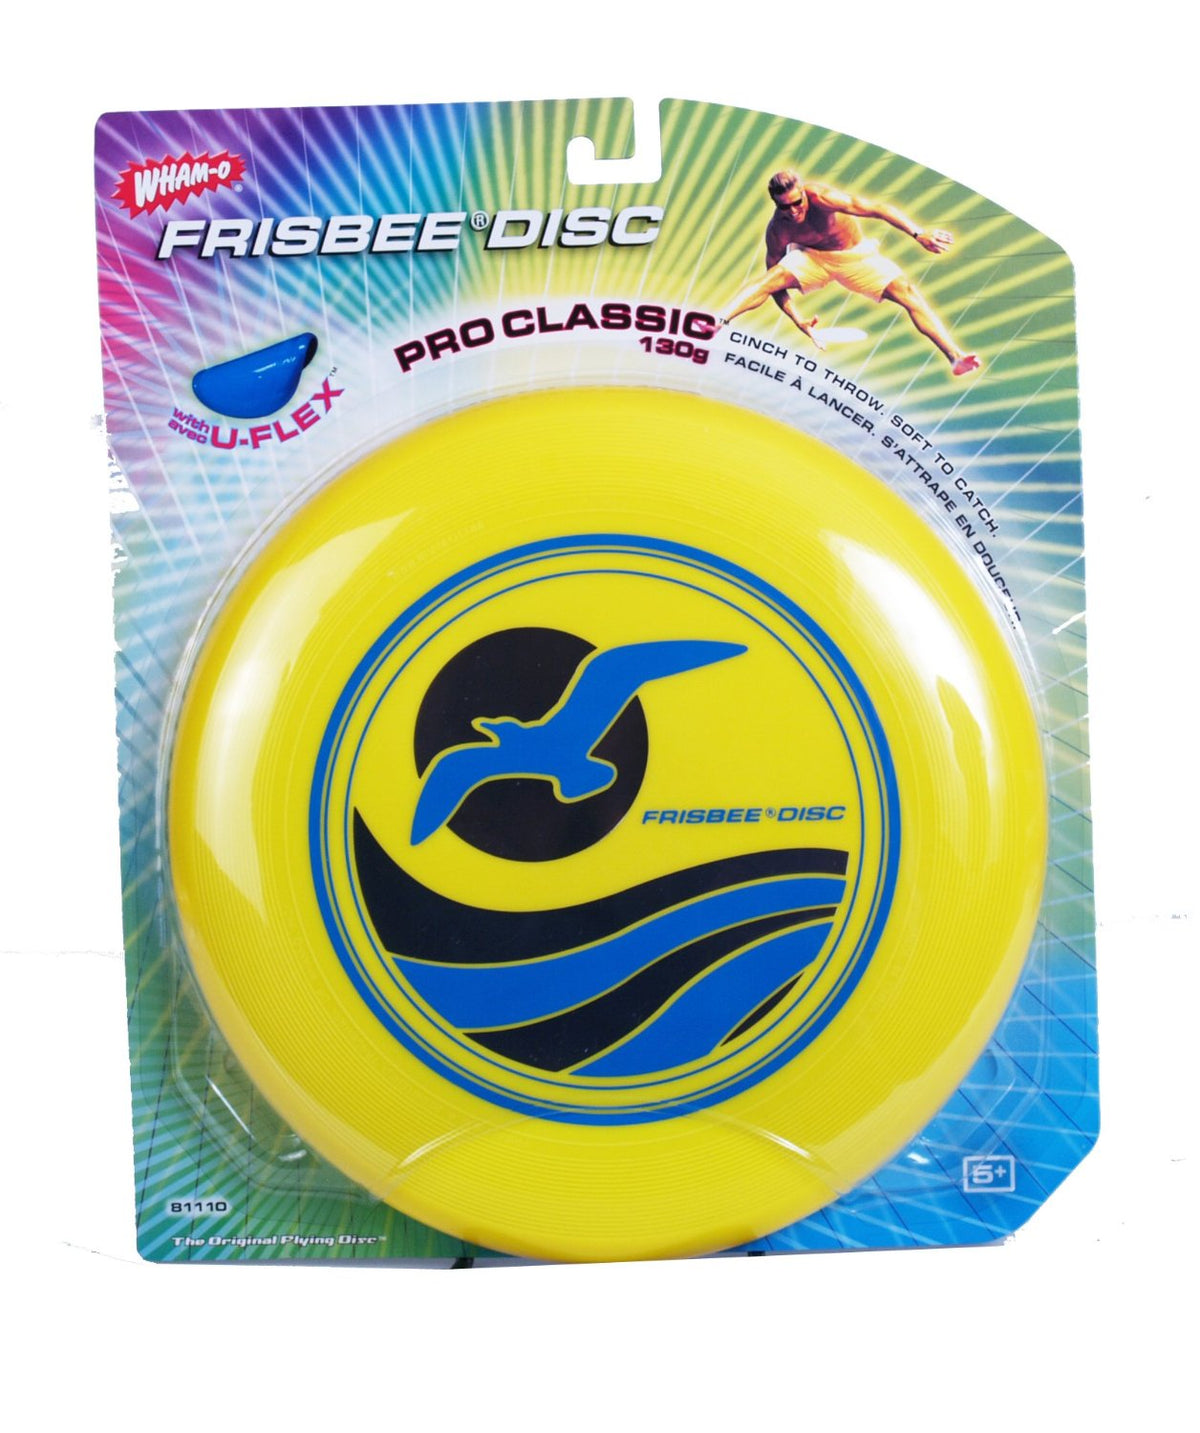 Wham-O® 81110 Frisbee® Pro-Classic® Disc, Assorted Colors, 130 Gram, 1-Qty